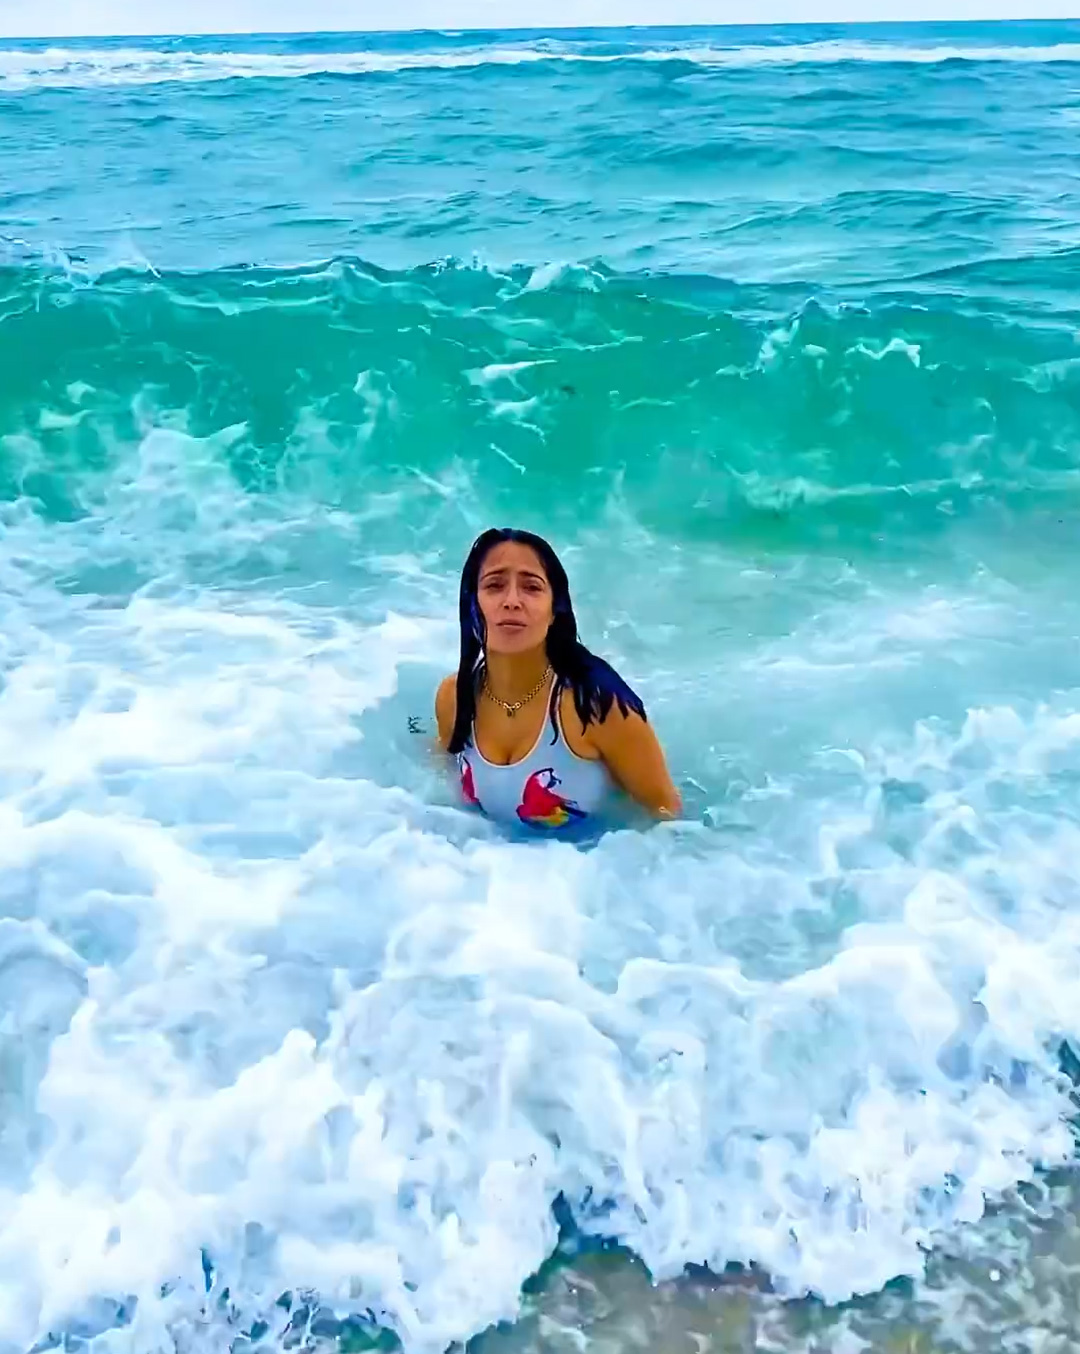 The actress's friend could be heard laughing as she recorded Salma being being tossed around by the ocean